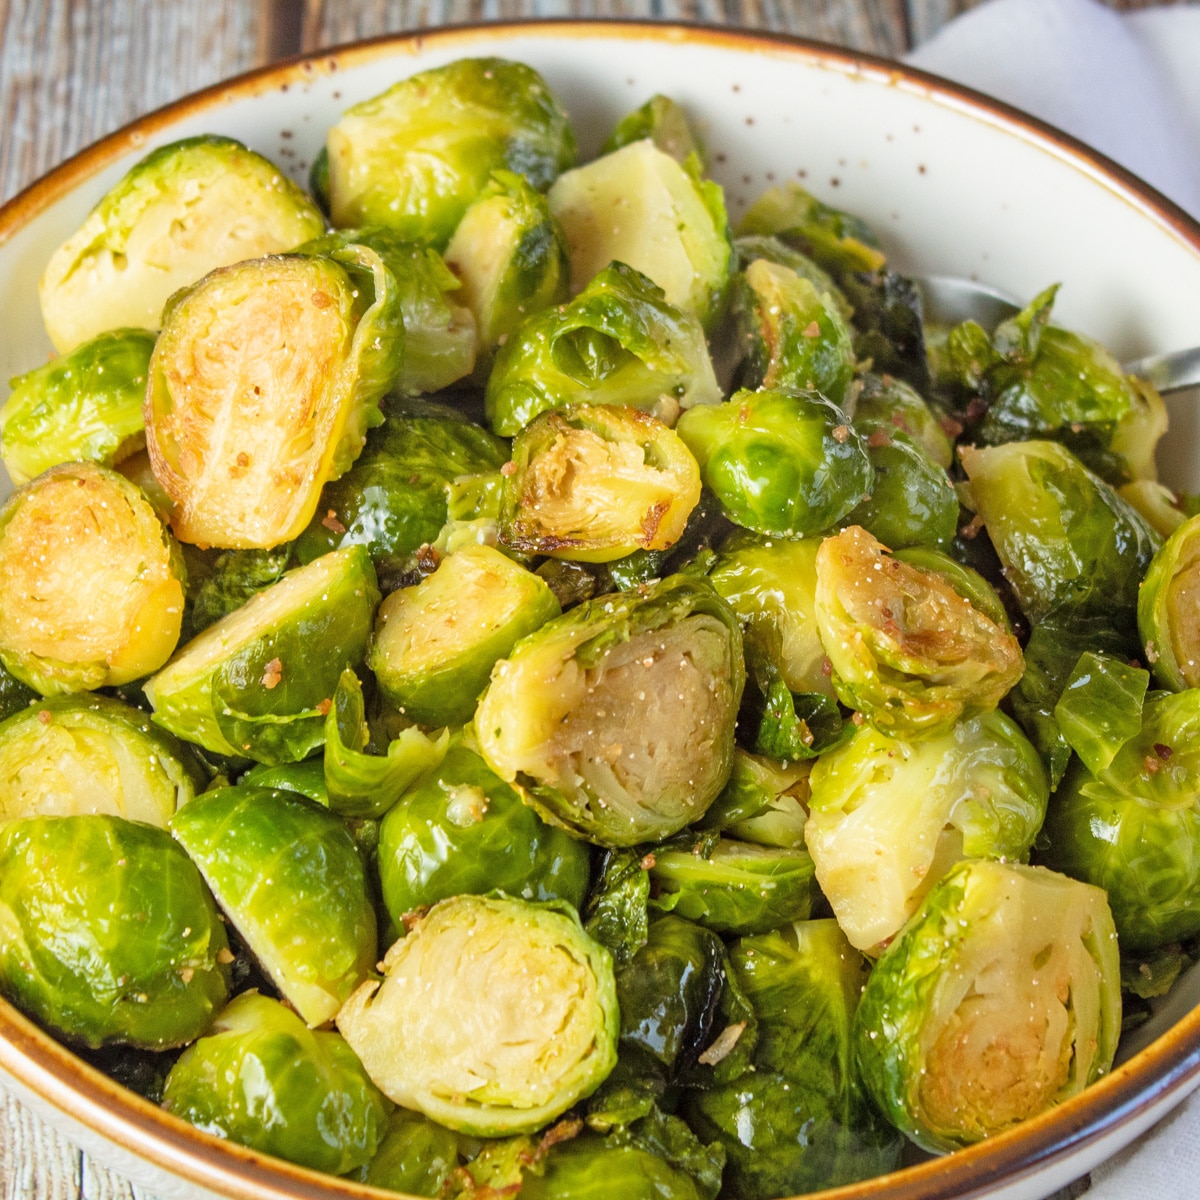 Square image of pan seared brussel sprouts in a large bowl.